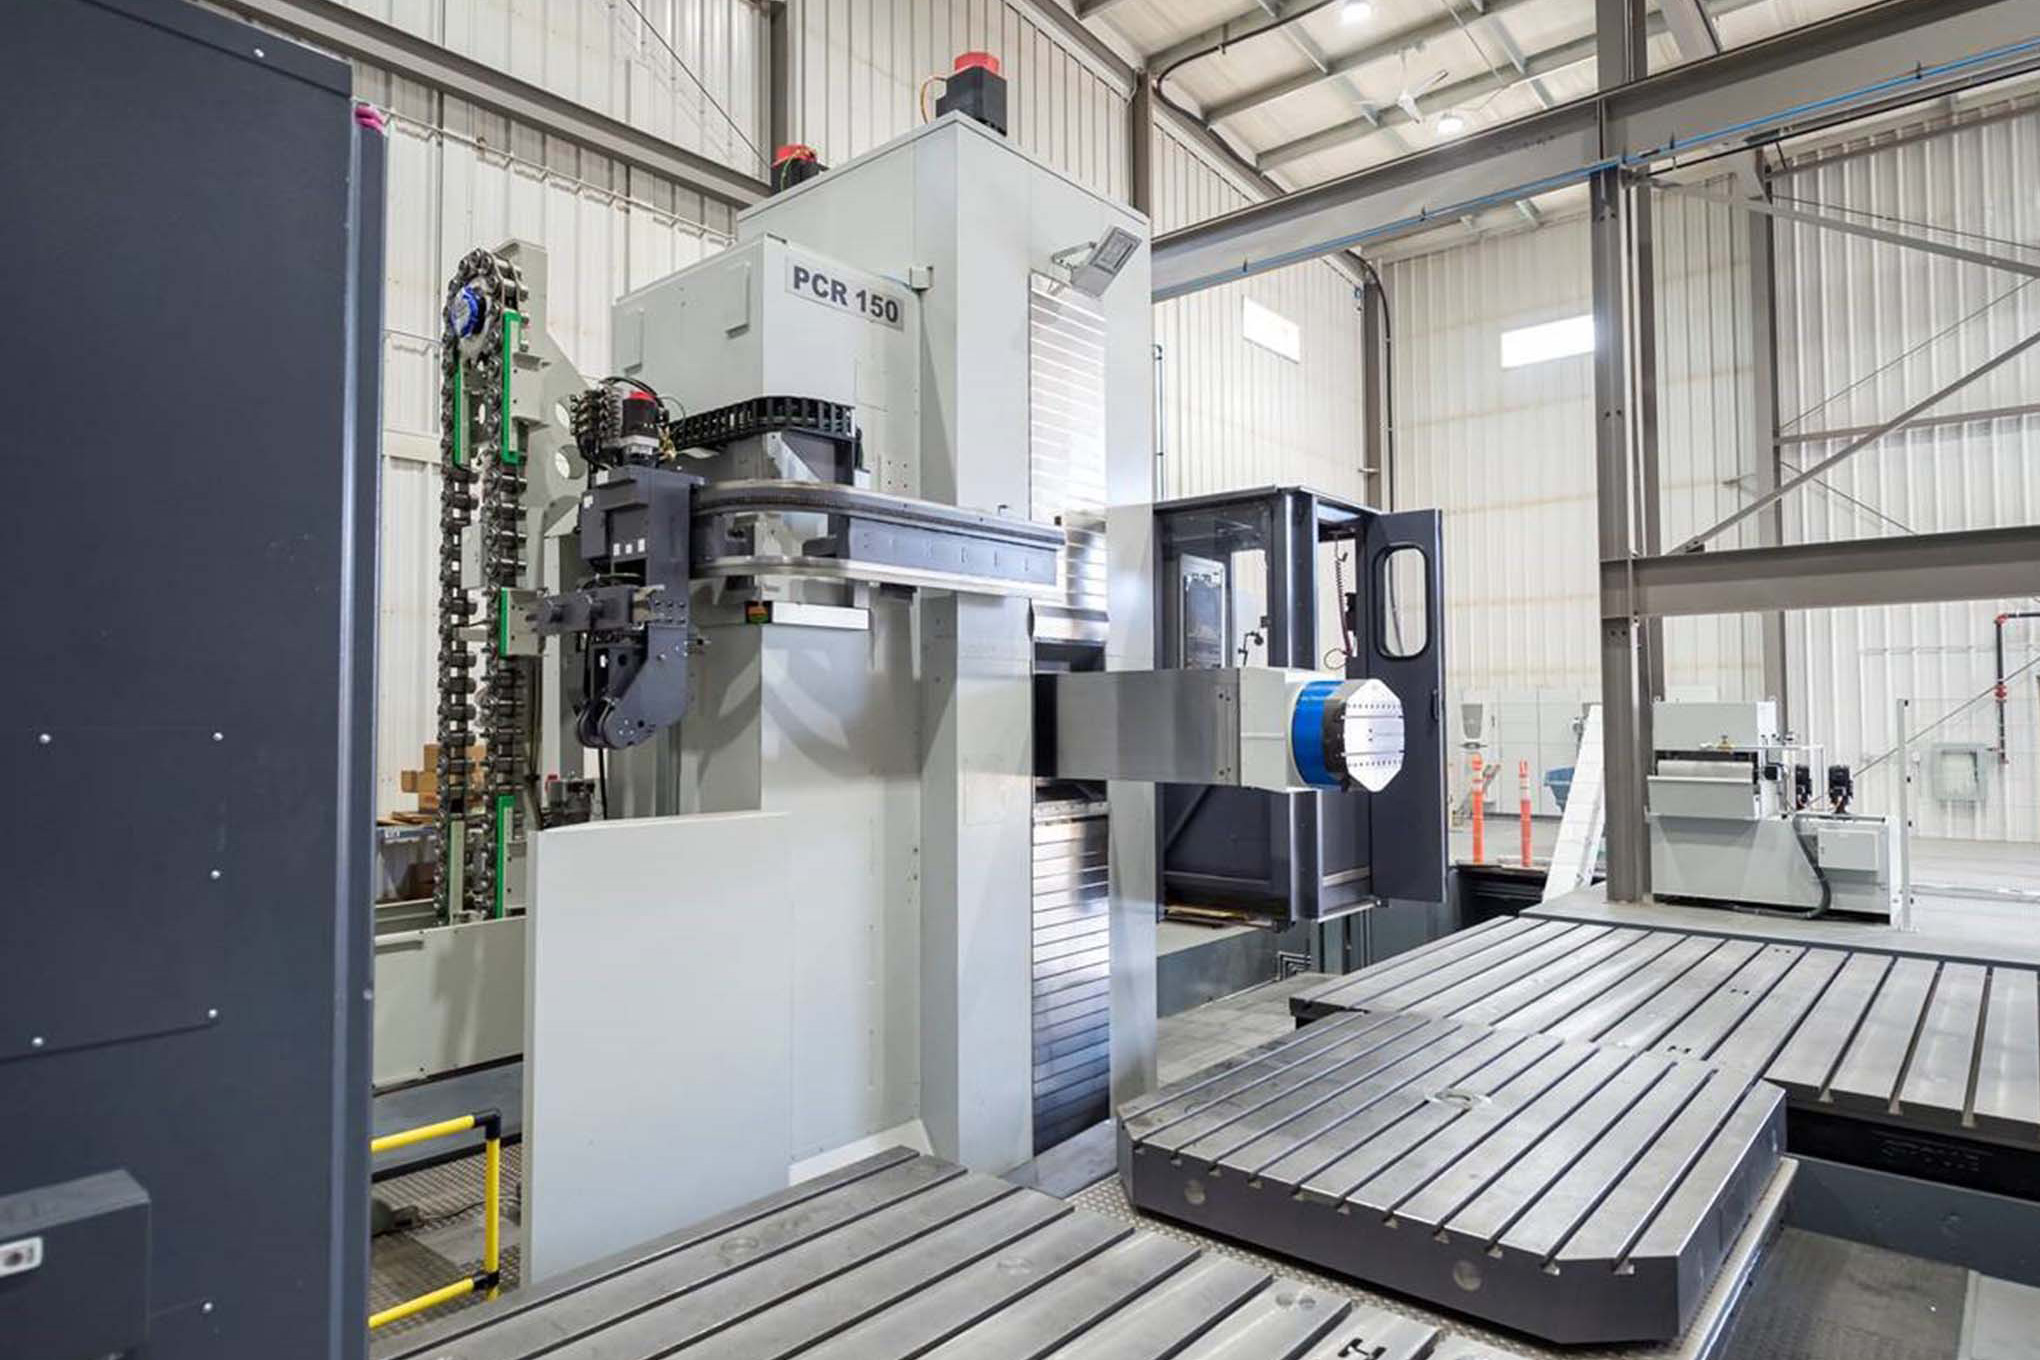 Prairie Machine and Party MfG. Ltd, has purchased a Union brand PCR 150 hydrostatic horizontal boring and milling machine